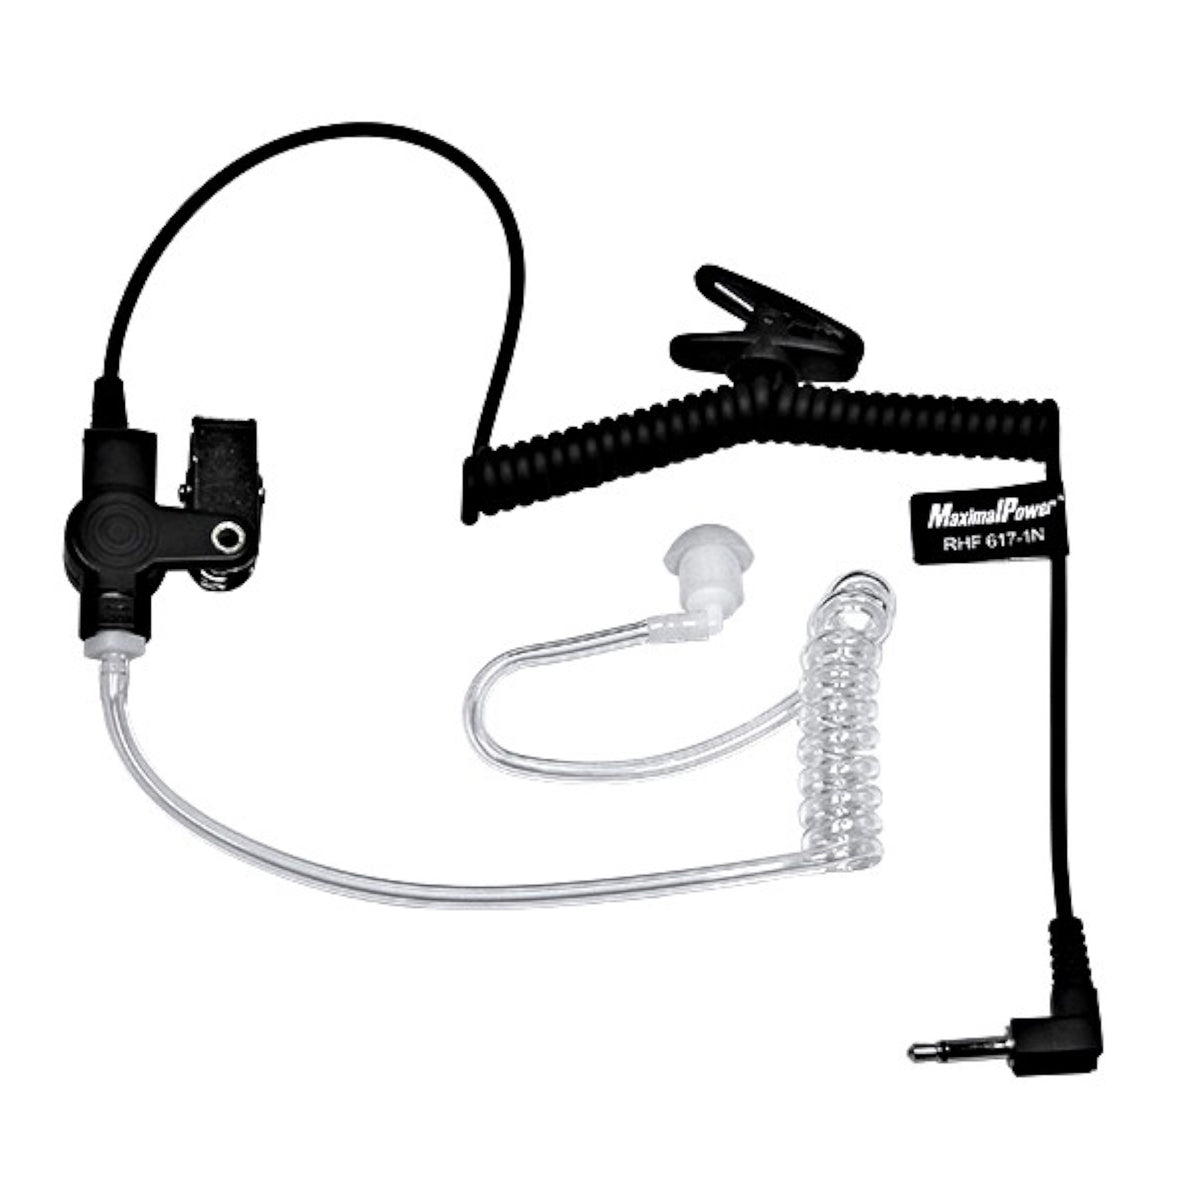 3.5mm Jack Listen-Only Audio Earpiece for Two-Way Radio Transceiver  Speakers Mics